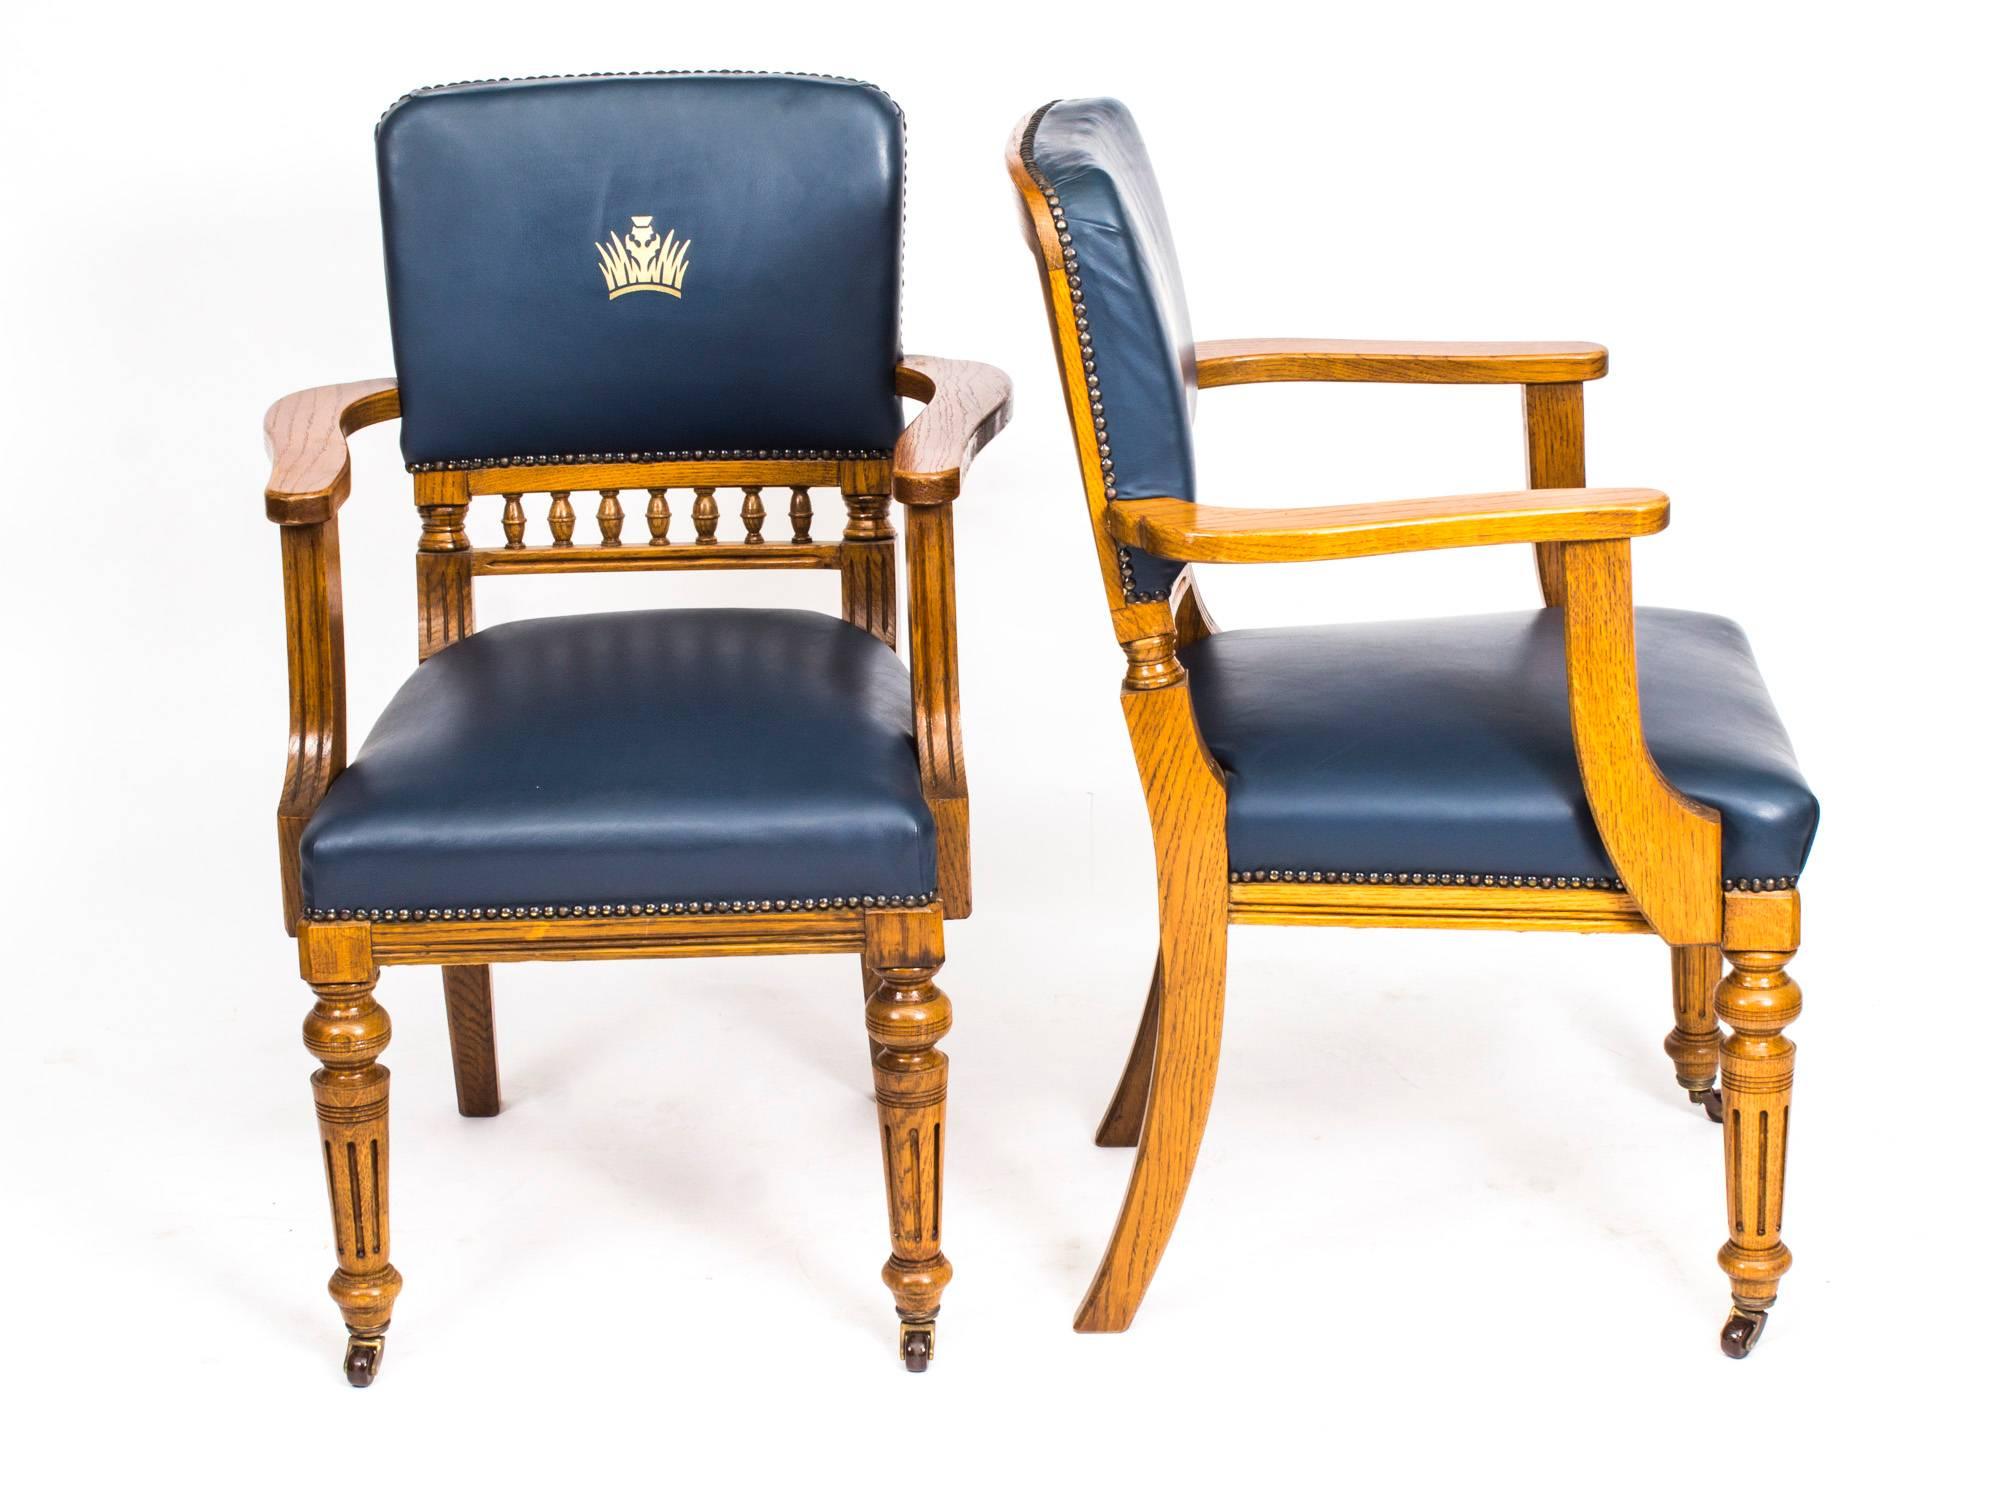 This is a rare opportunity to purchase a Victorian antique set of 12 Scottish oak dining chairs, circa 1870 in date.
This set was made from solid oak by a master craftsman, and should last for generations more. 

The set comprises ten side chairs